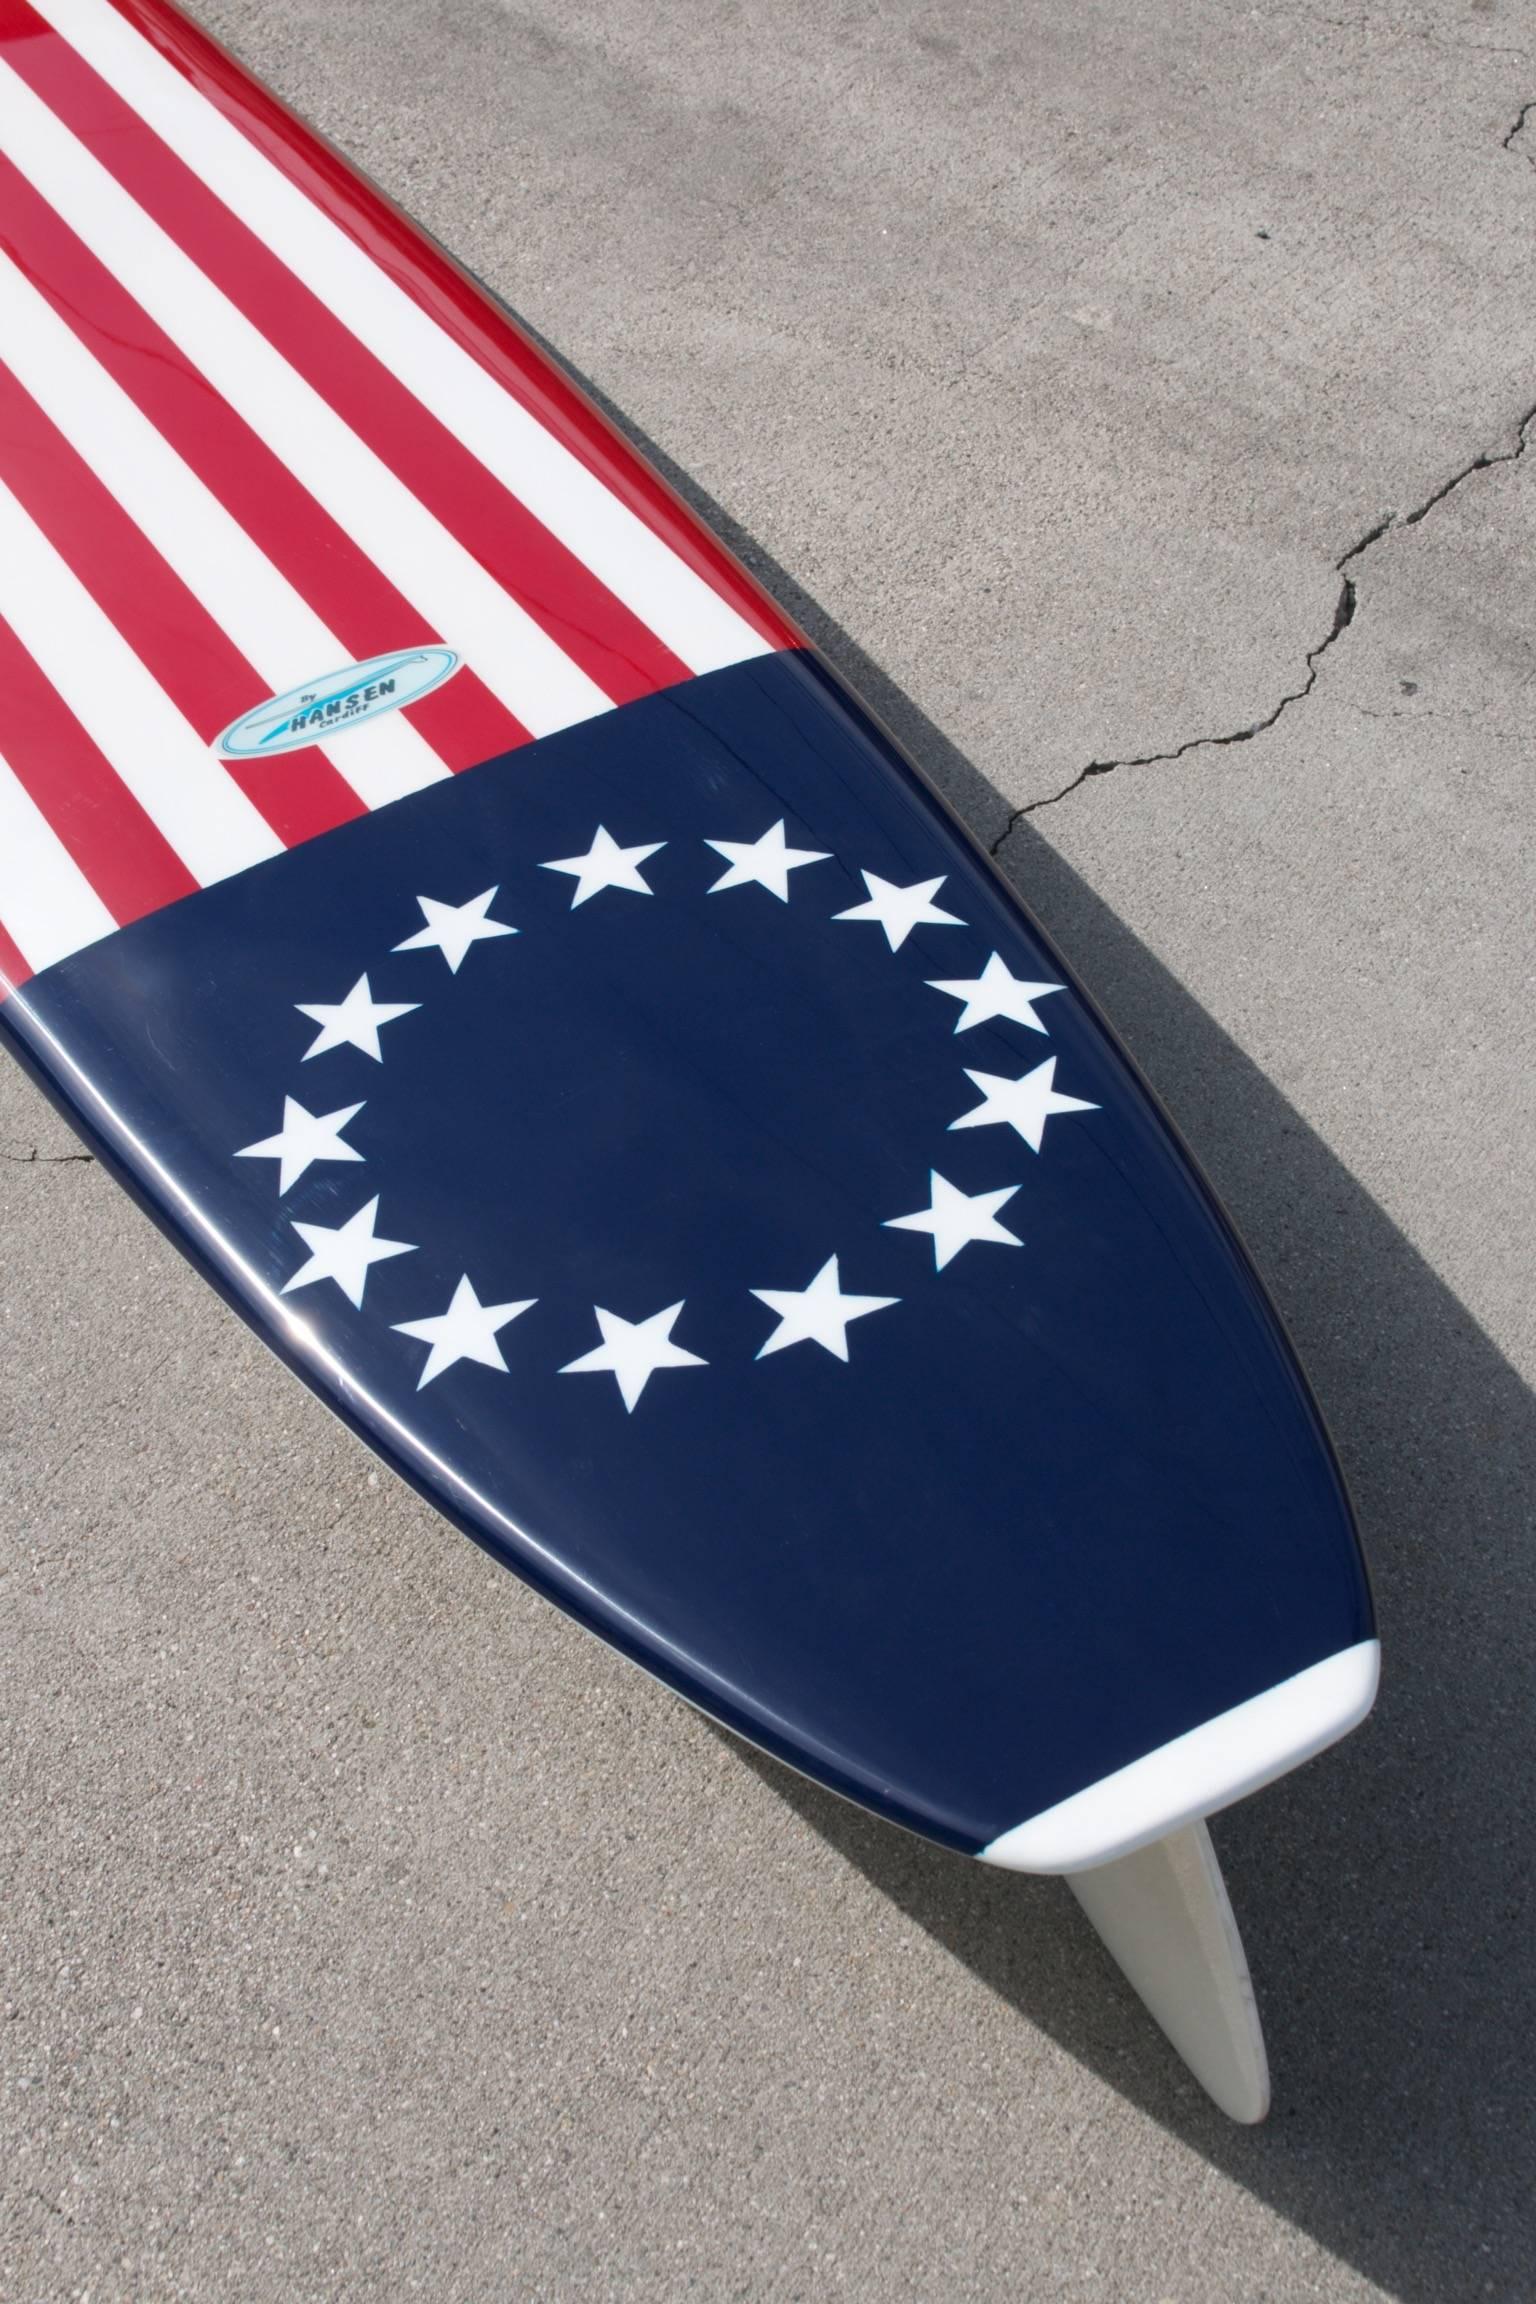 Stars and Stripes, American Navy Flag Surfboard by Hanson, c 1962 Fully Restored 3